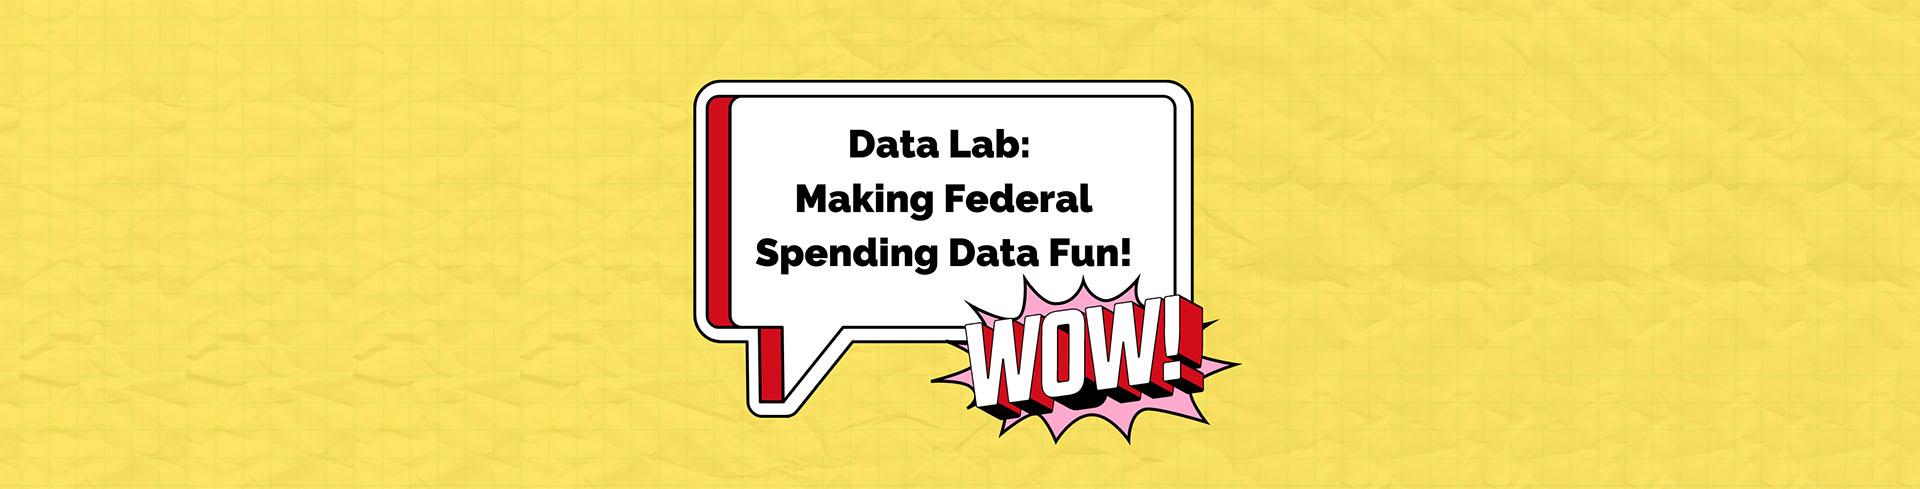 Image with text: Data Lab Making Federal Spending Data Fun!